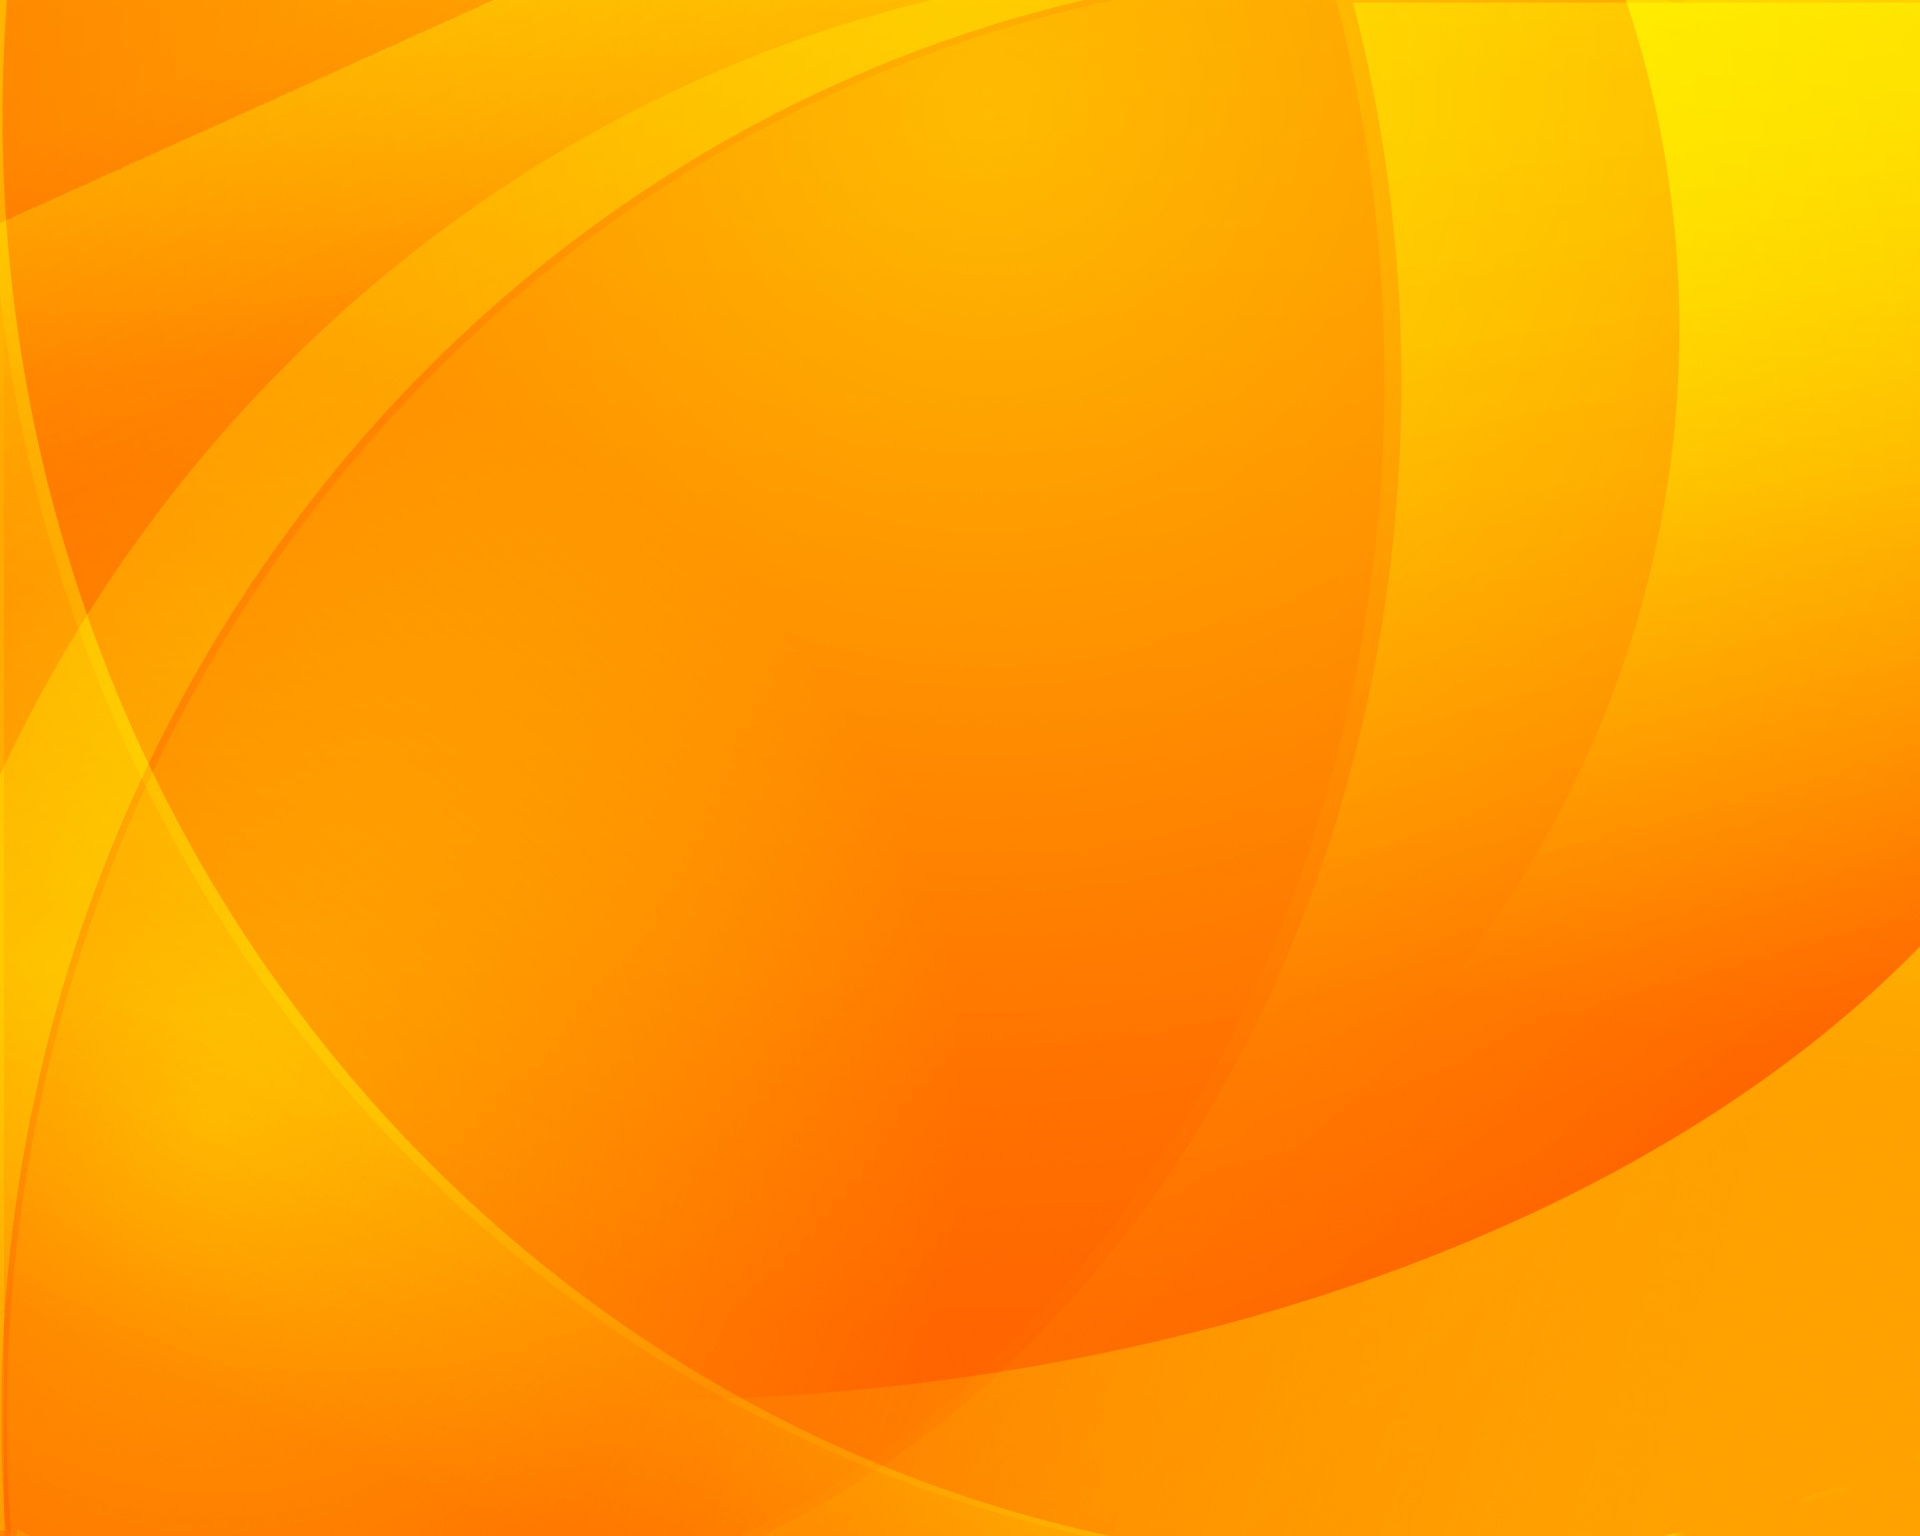 Wallpaper Background Abstract Free Photo - Orange Curve Background - HD Wallpaper 